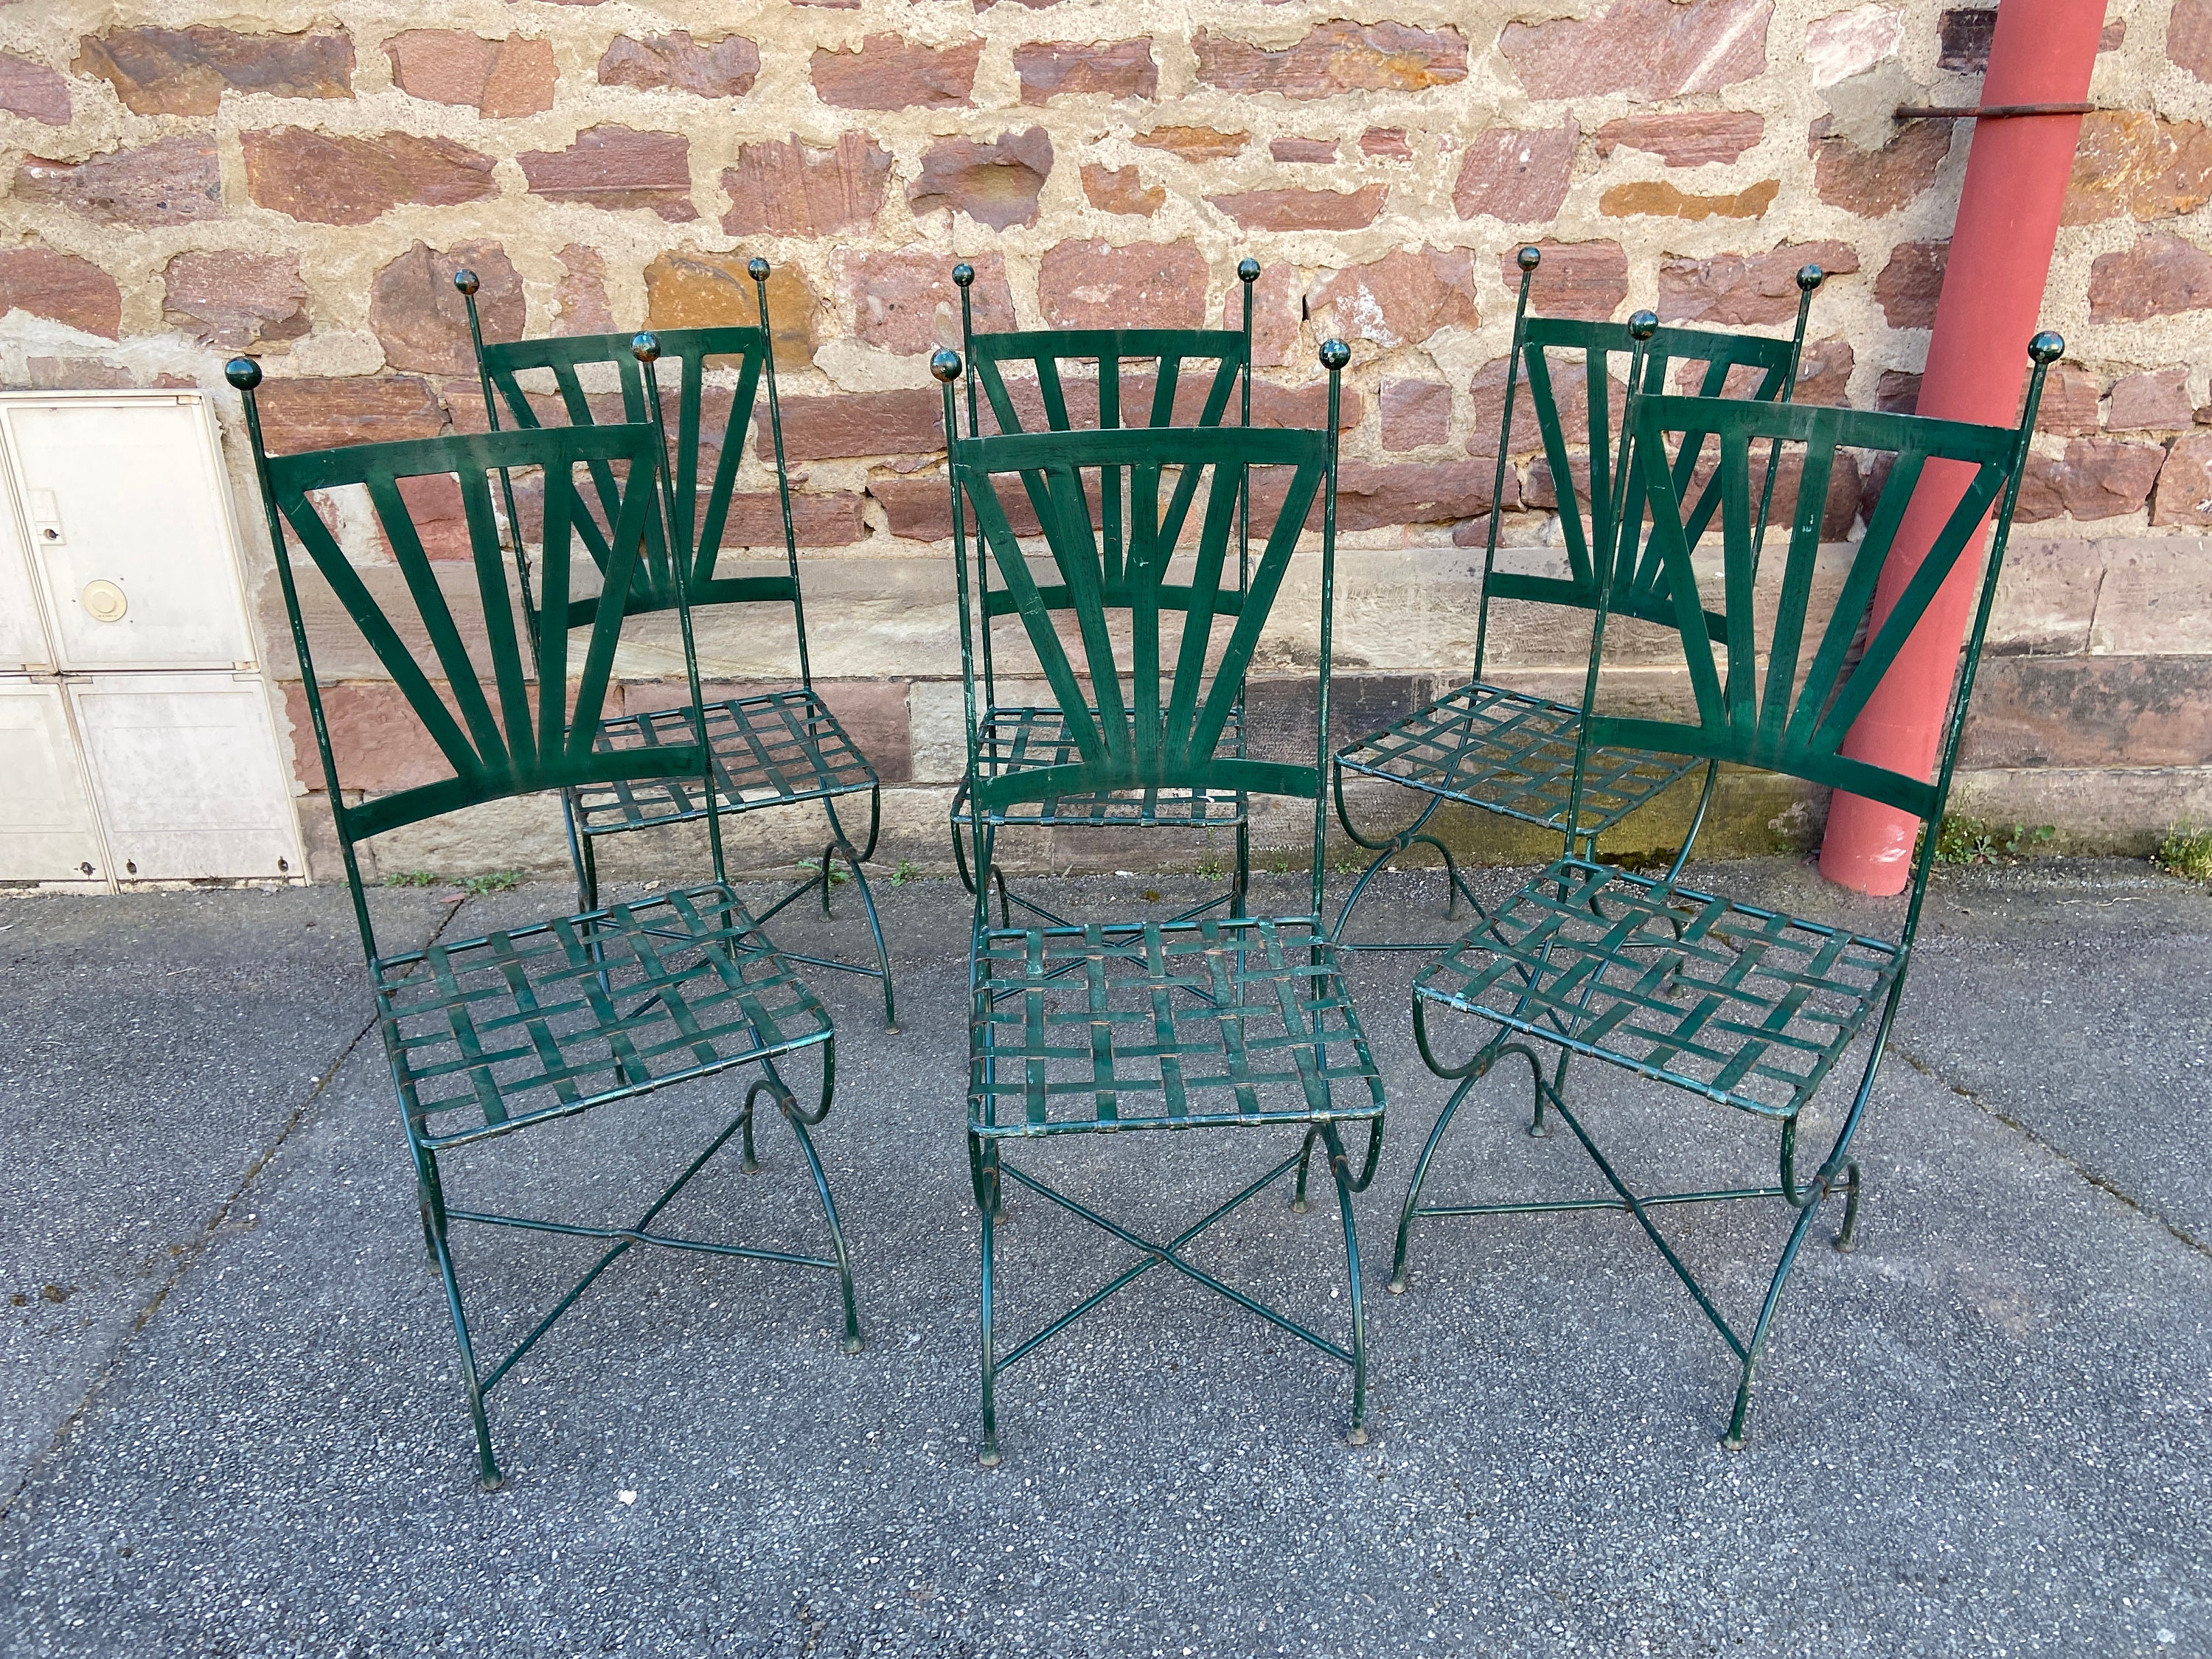 6 Chaises Jardin Fer Forgé French Bistrot Chairs Paris Terrasse 1980S